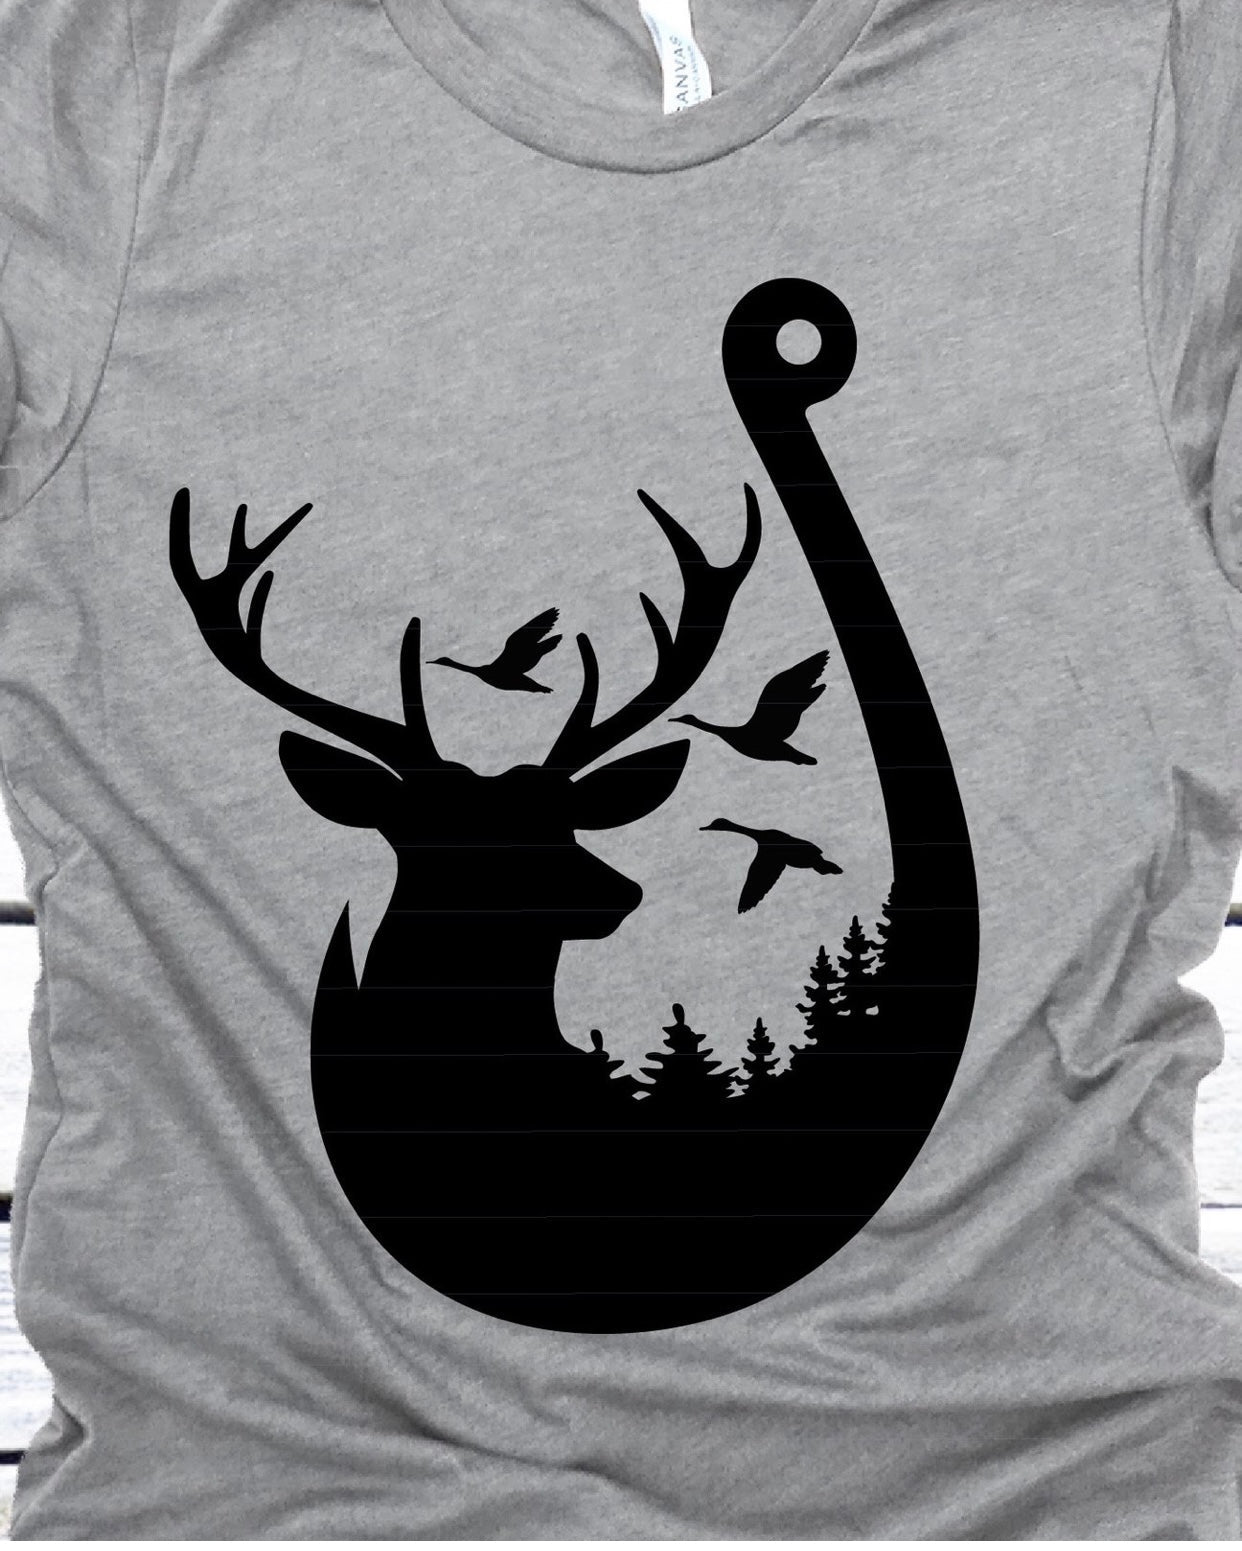 FISHING AND HUNTING CUSTOM GRAPHIC TOP - WESTERN STYLIN'